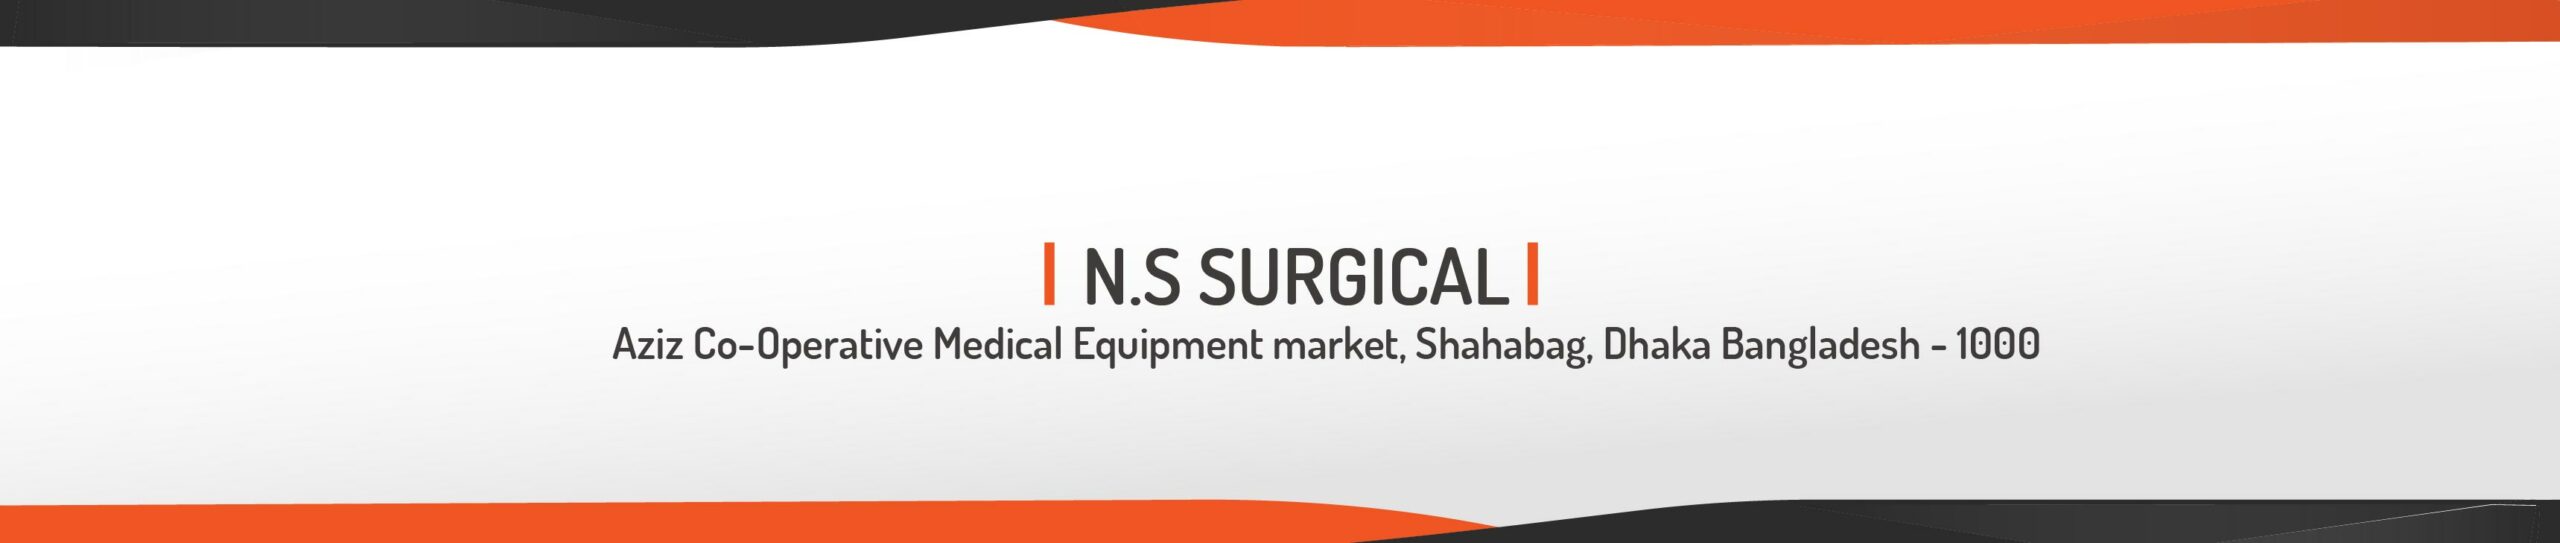 N.S SURGICAL